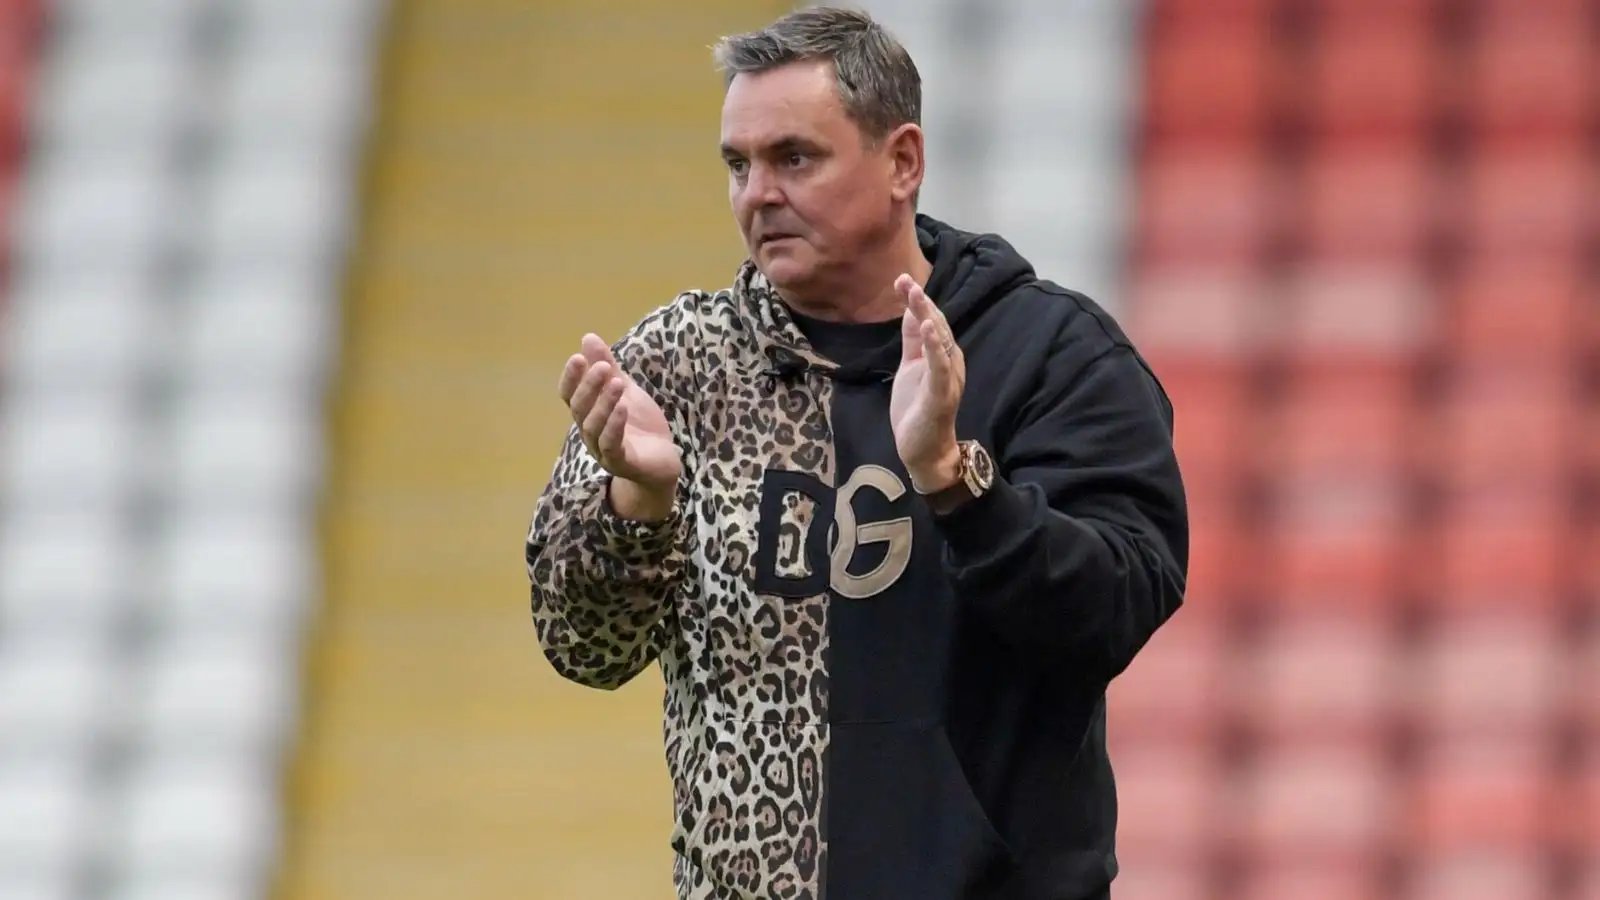 Leigh Leopards owner Derek Beaumont bemoans club’s injury woes; ‘Others are getting men back while we’re losing them’